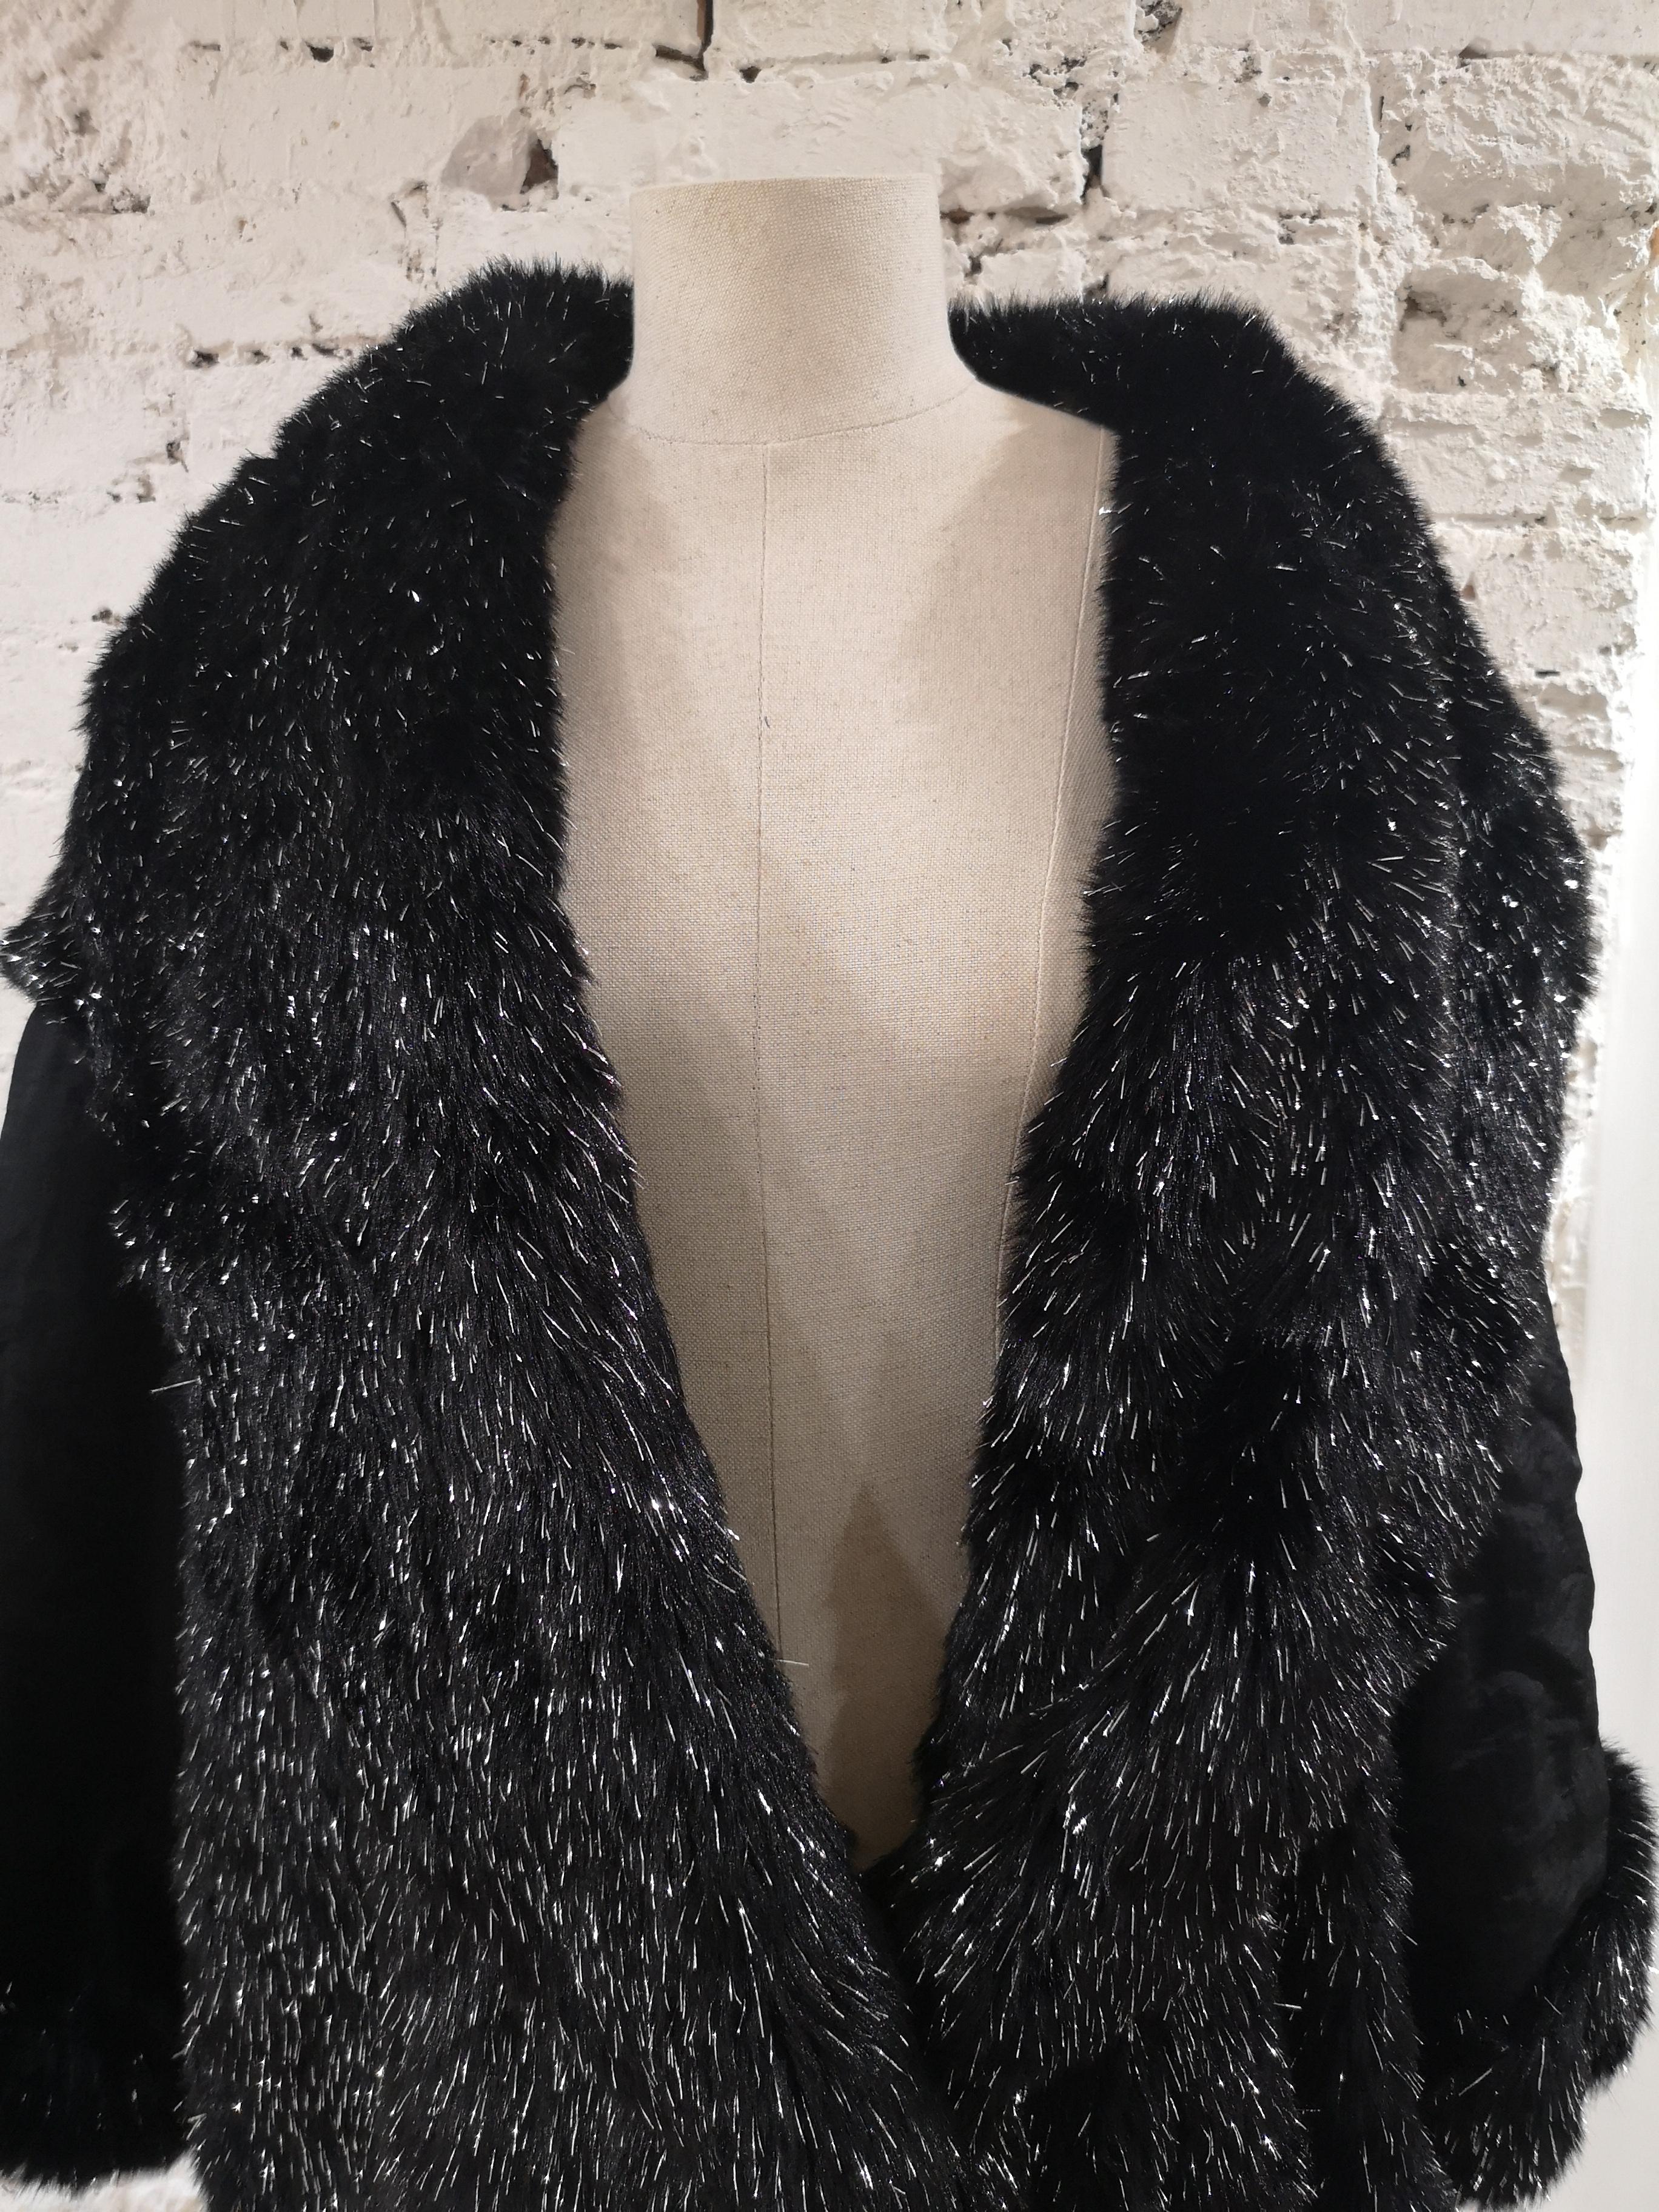 Vintage Dirada black faux fur coat 
totally made in italy in size L